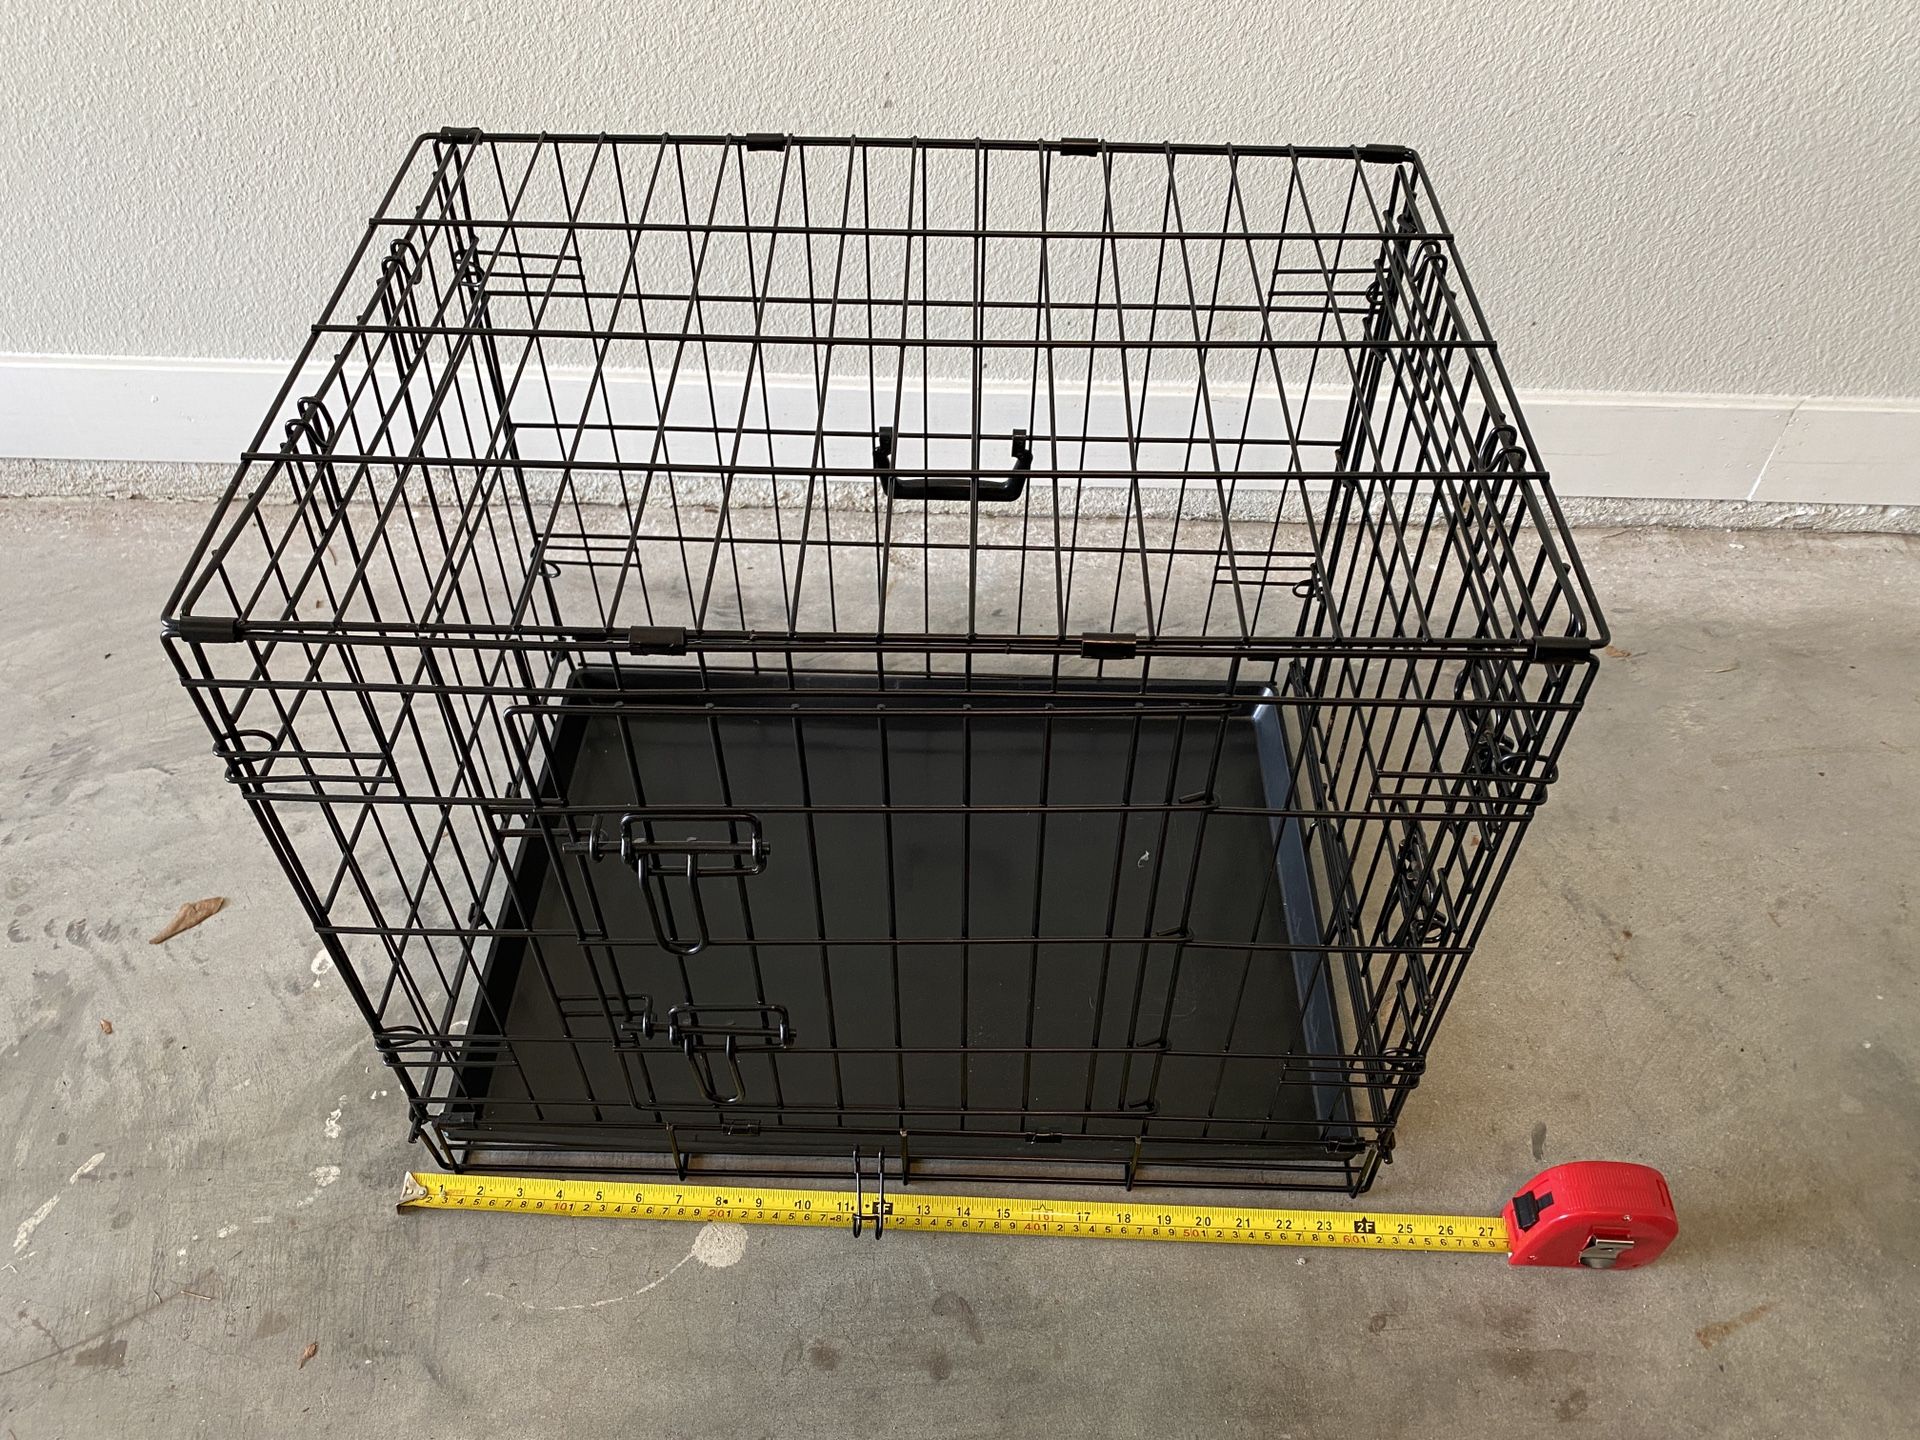 Dog Crate - Small